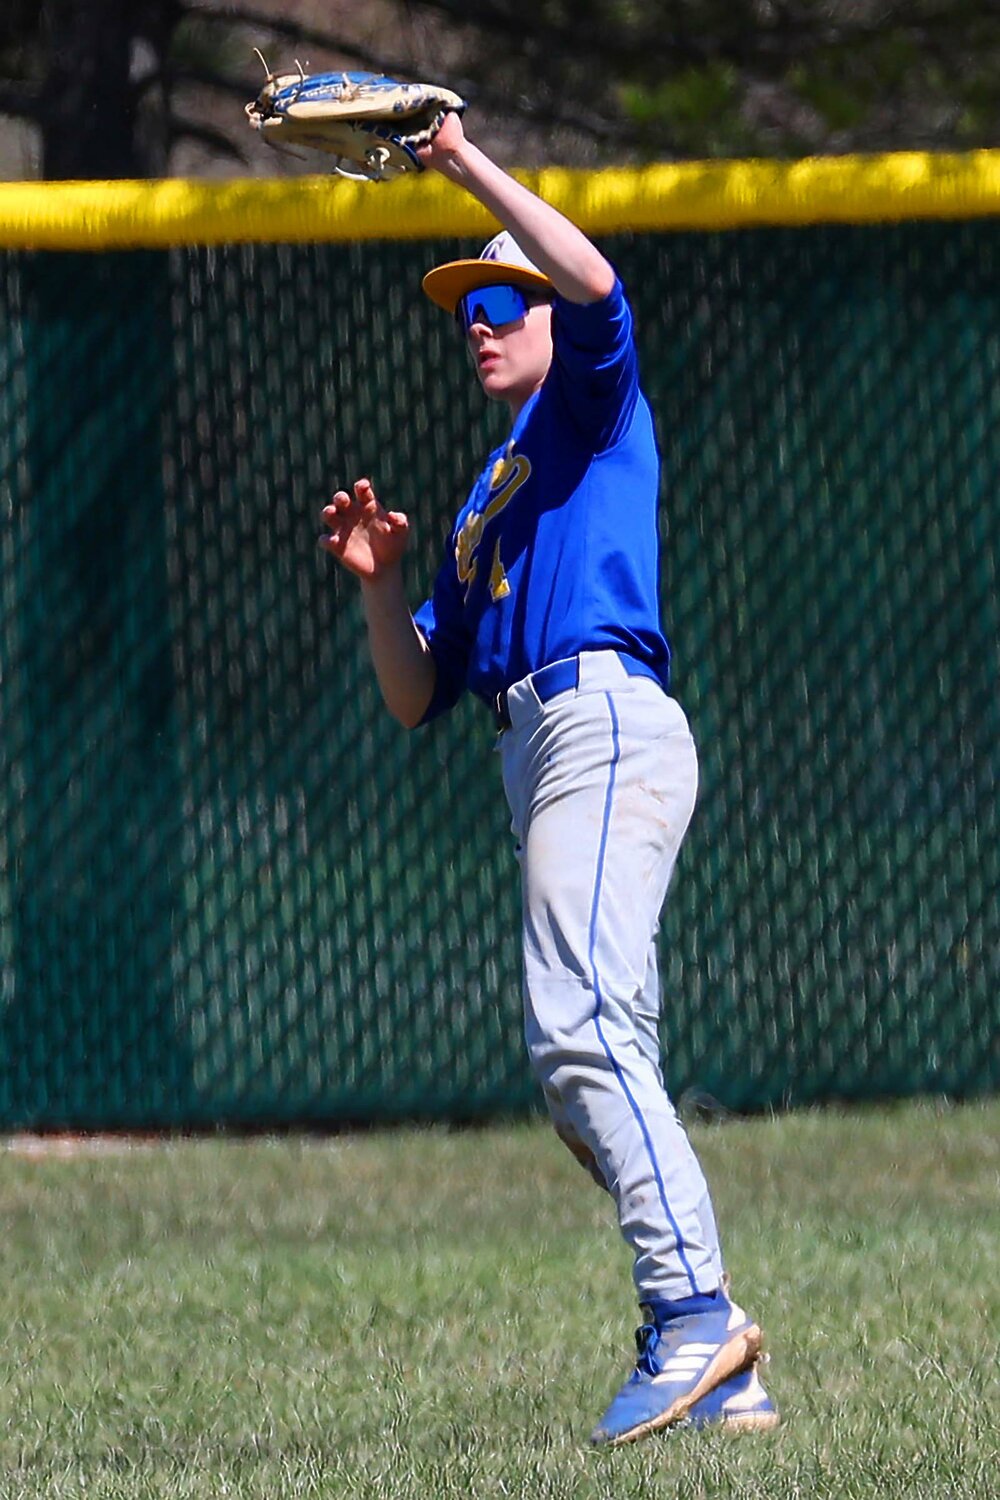 Mason McCarty of Crawfordsville - catching a fly in right field to end the game